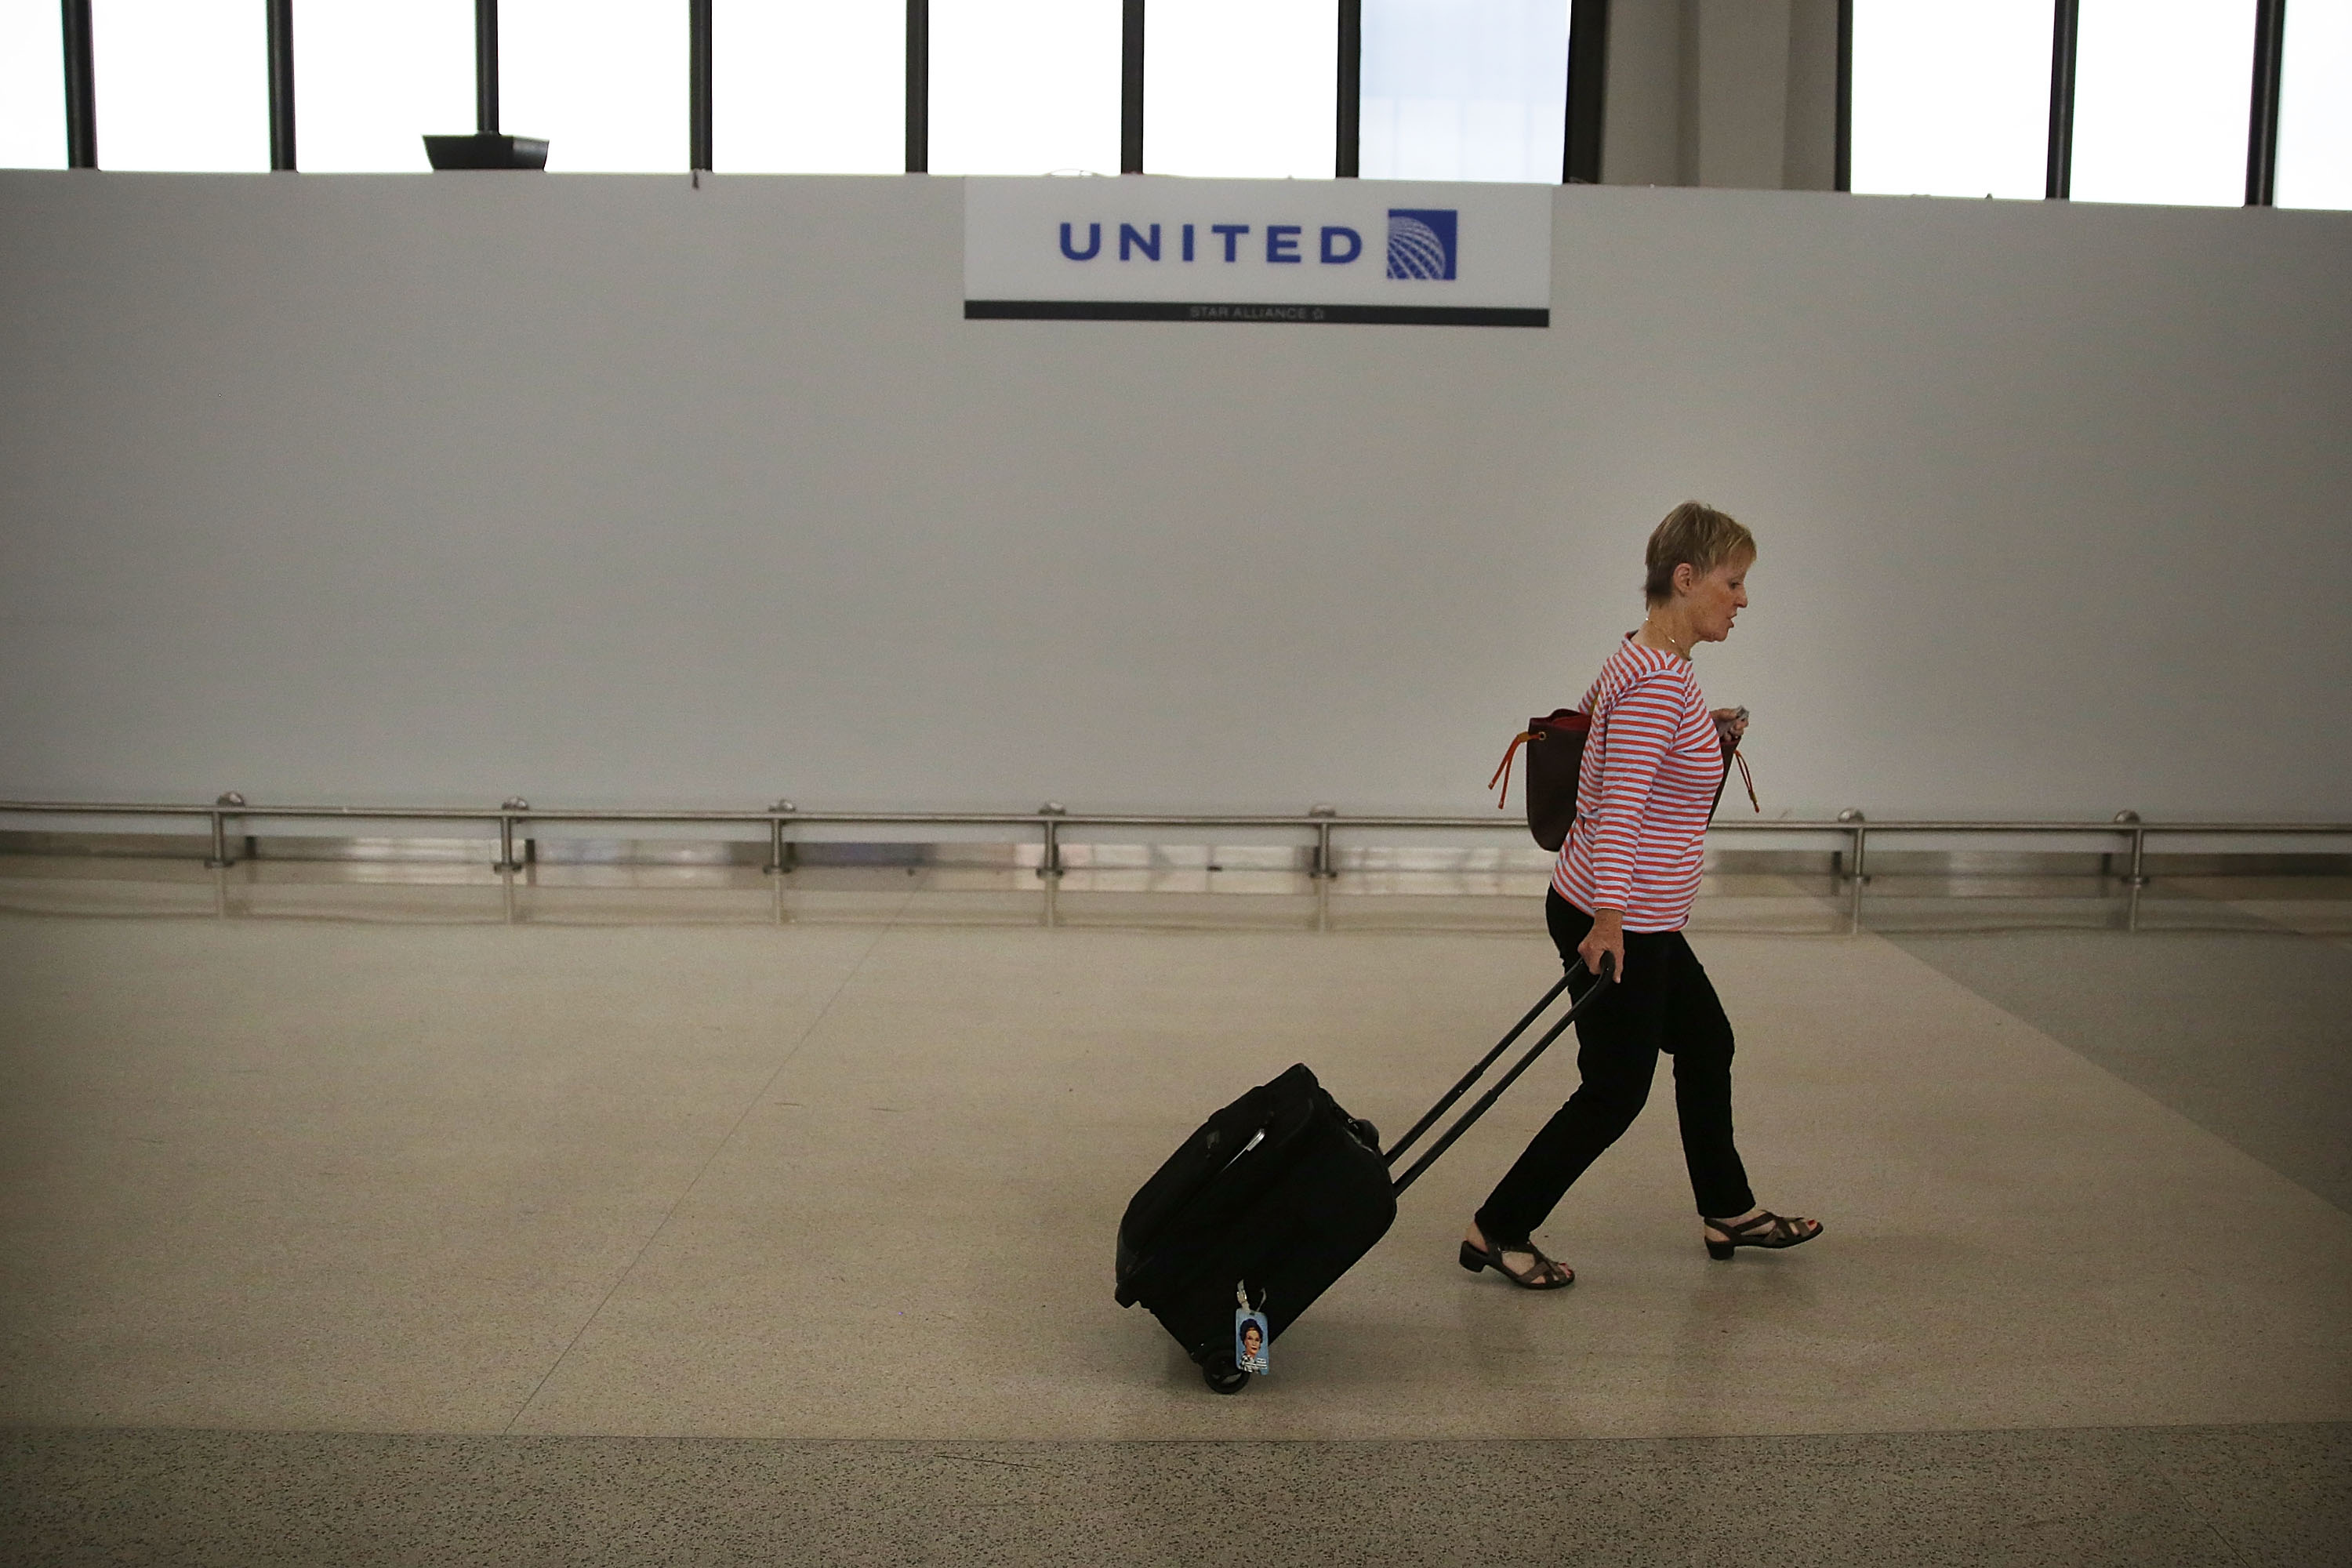 A traveler walks through the United Airlines terminal at Newark Liberty Airport on July 8, 2015 in Newark, New Jersey. (Spencer Platt—Getty Images)